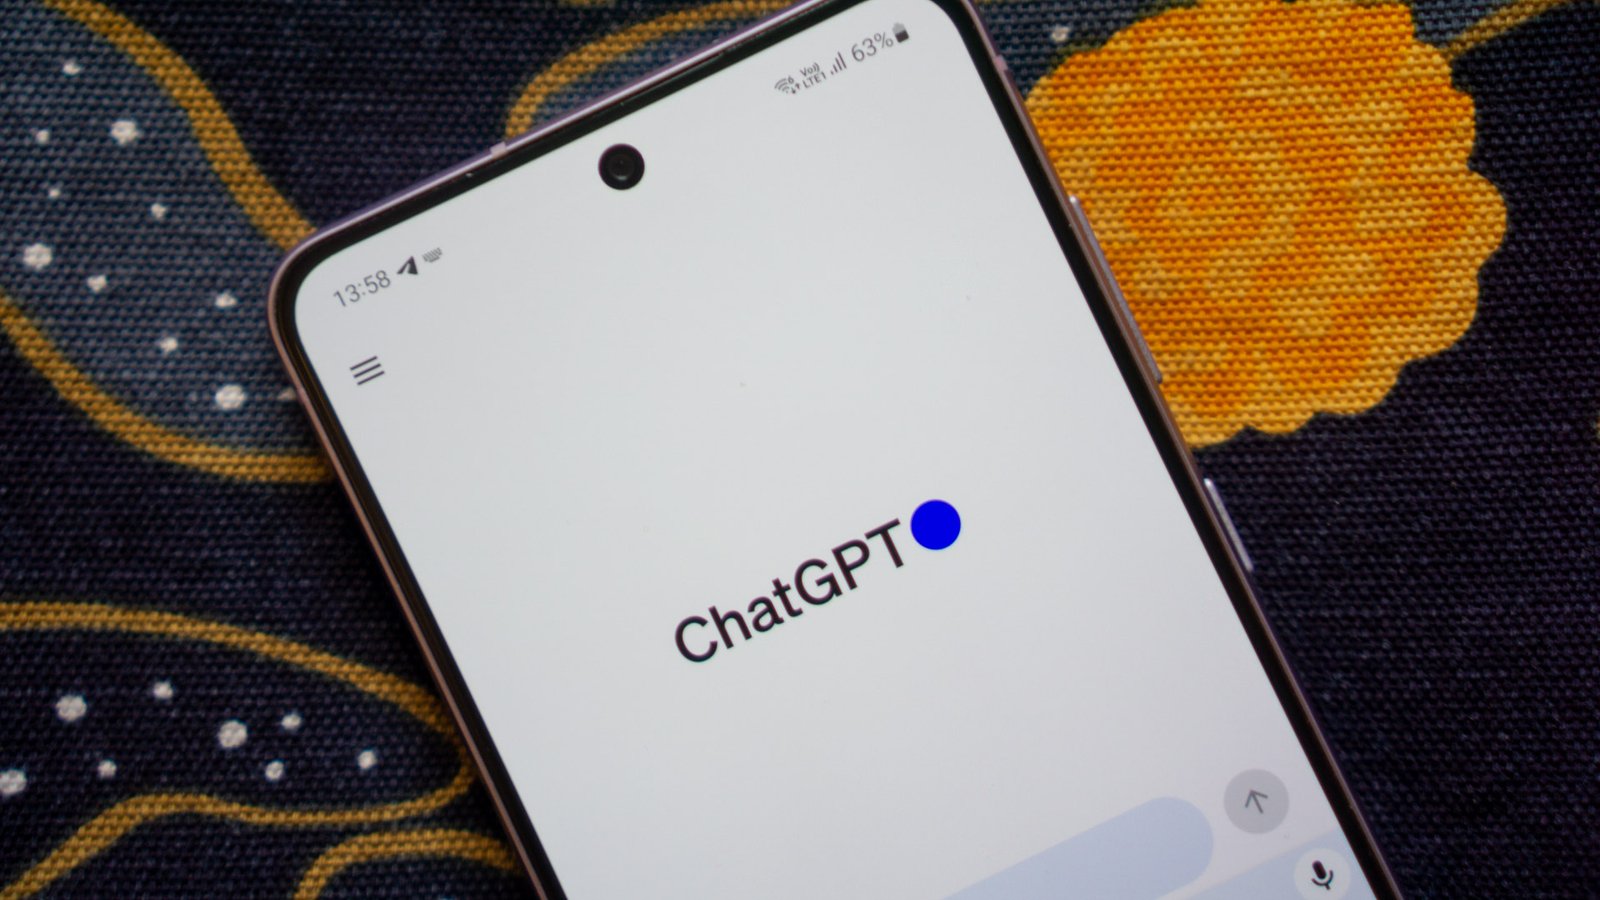 ChatGPT access is now instant. You no longer need an account to use it.